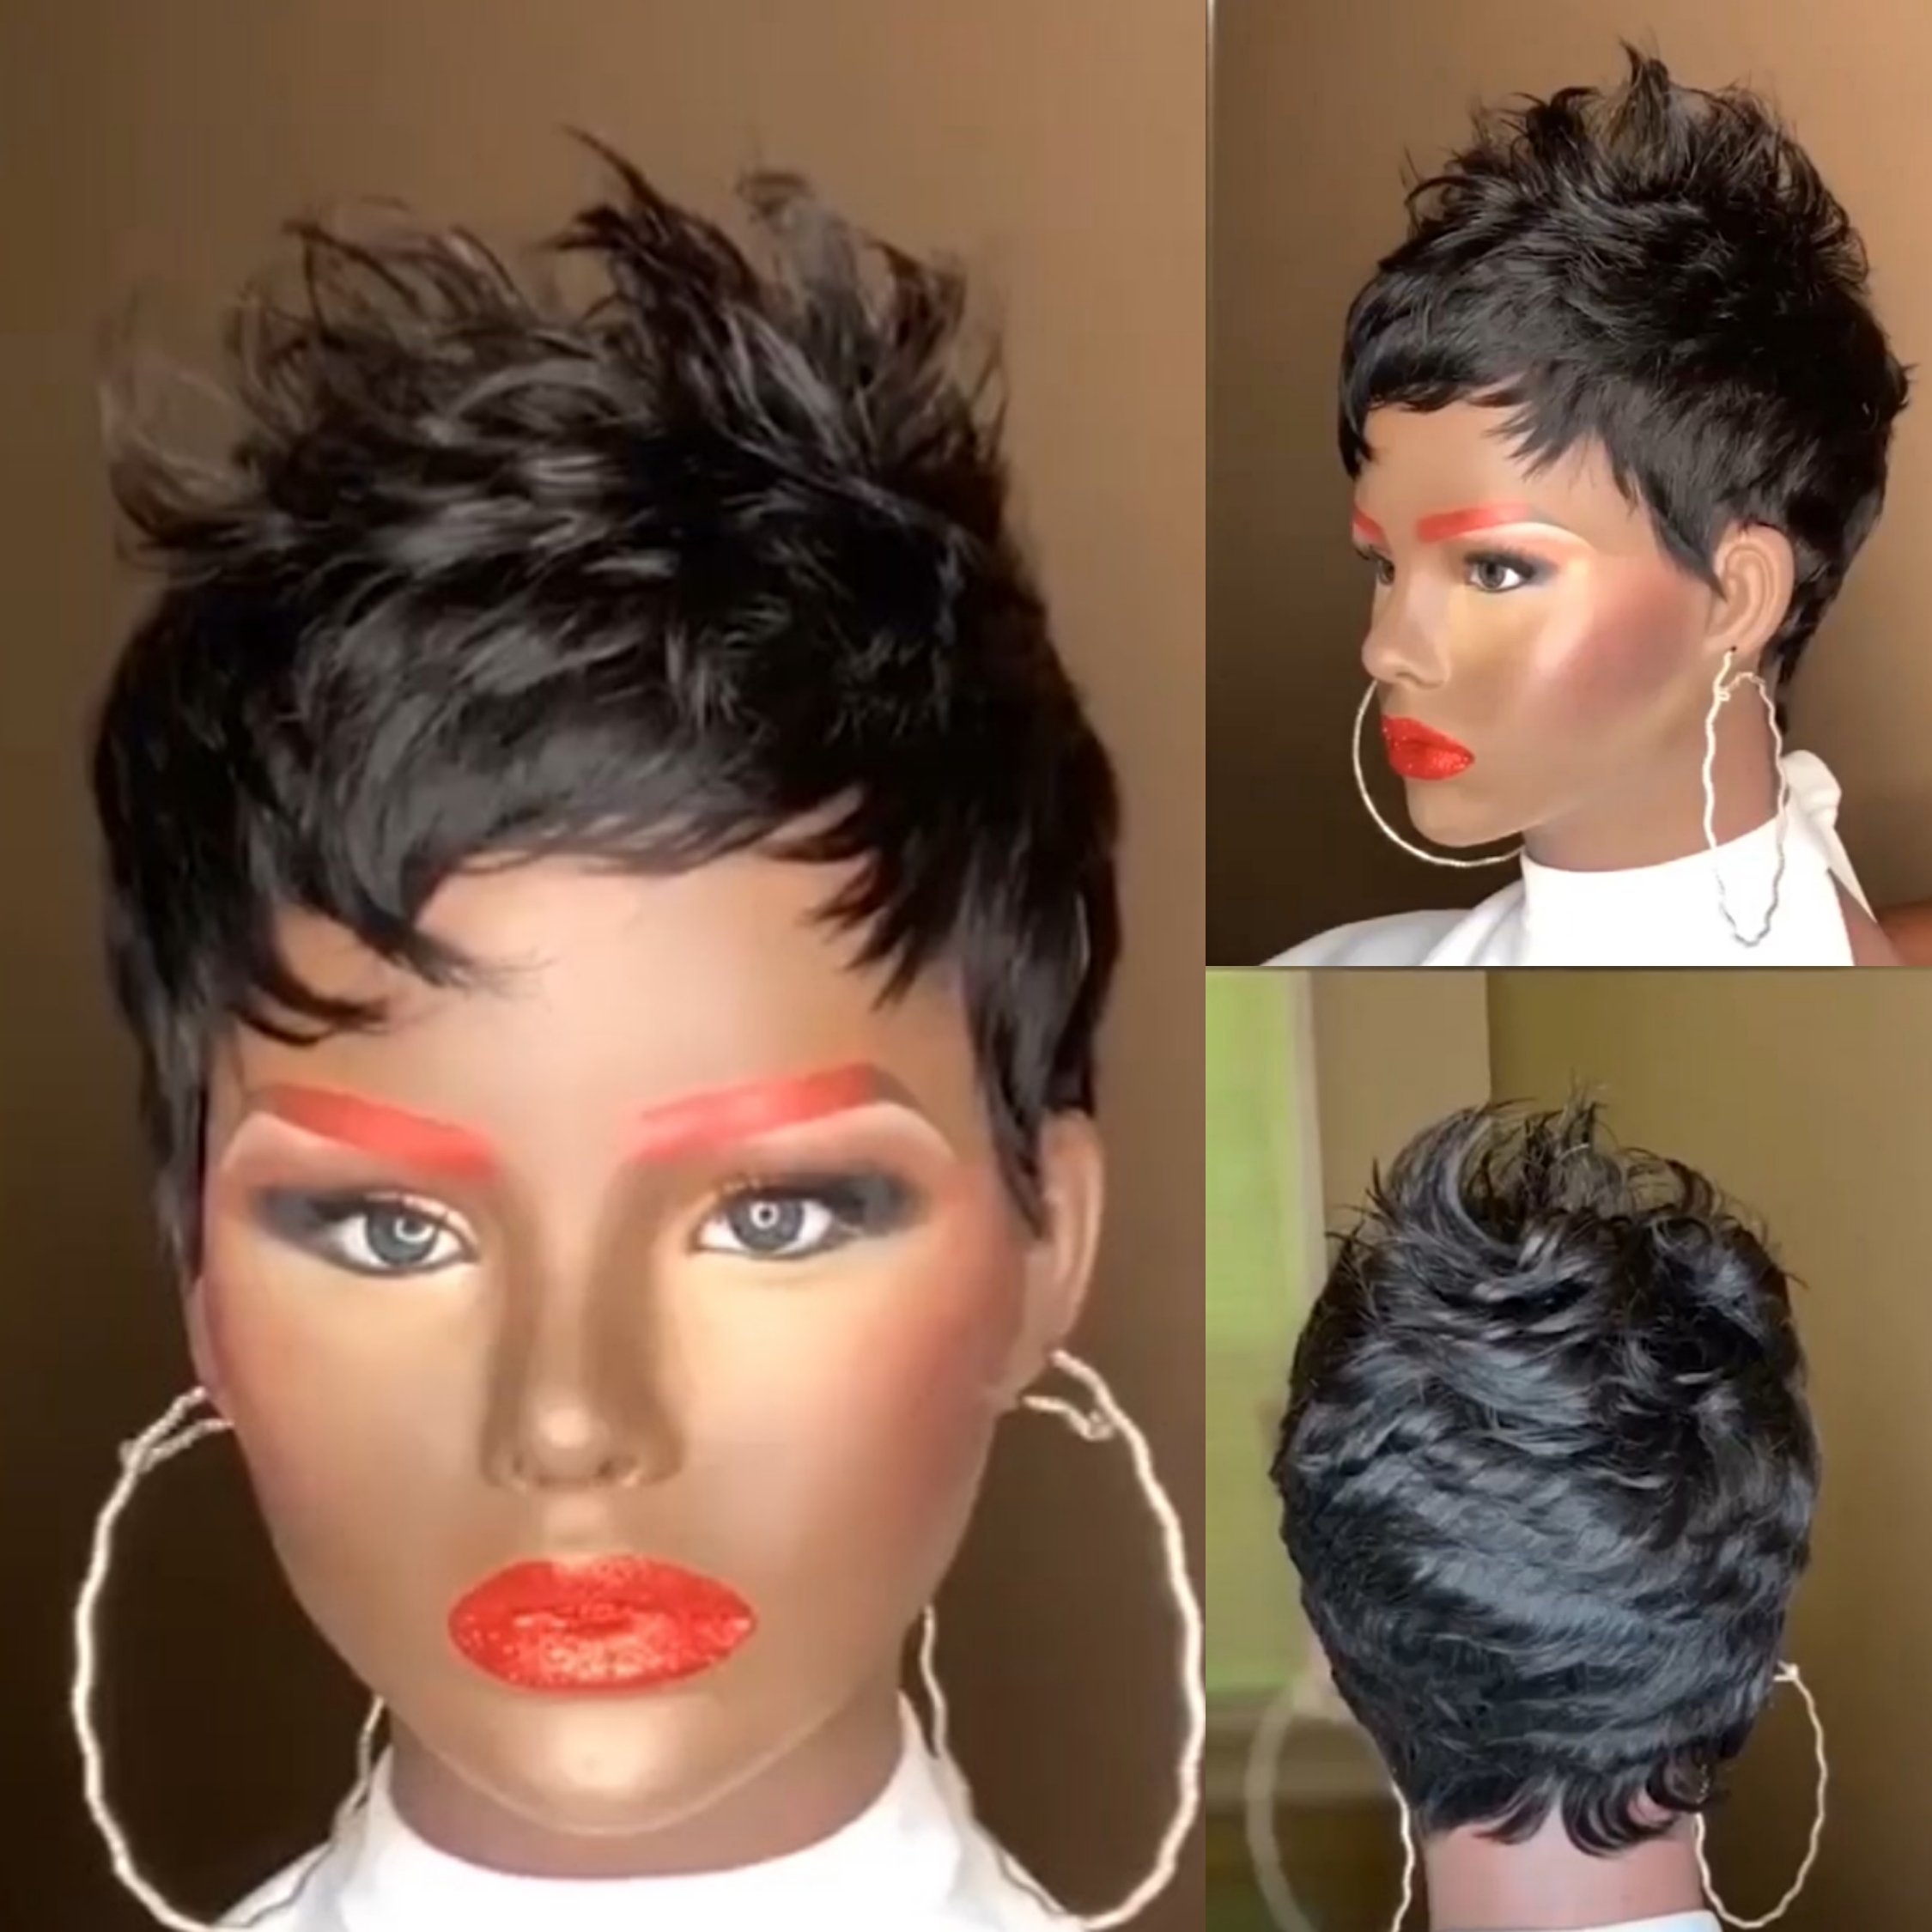 Glueless Wig With Elastic Belt| 🎁NEW Pixie Cut Straight Lace Front Wig Human BOB Hair Wigs